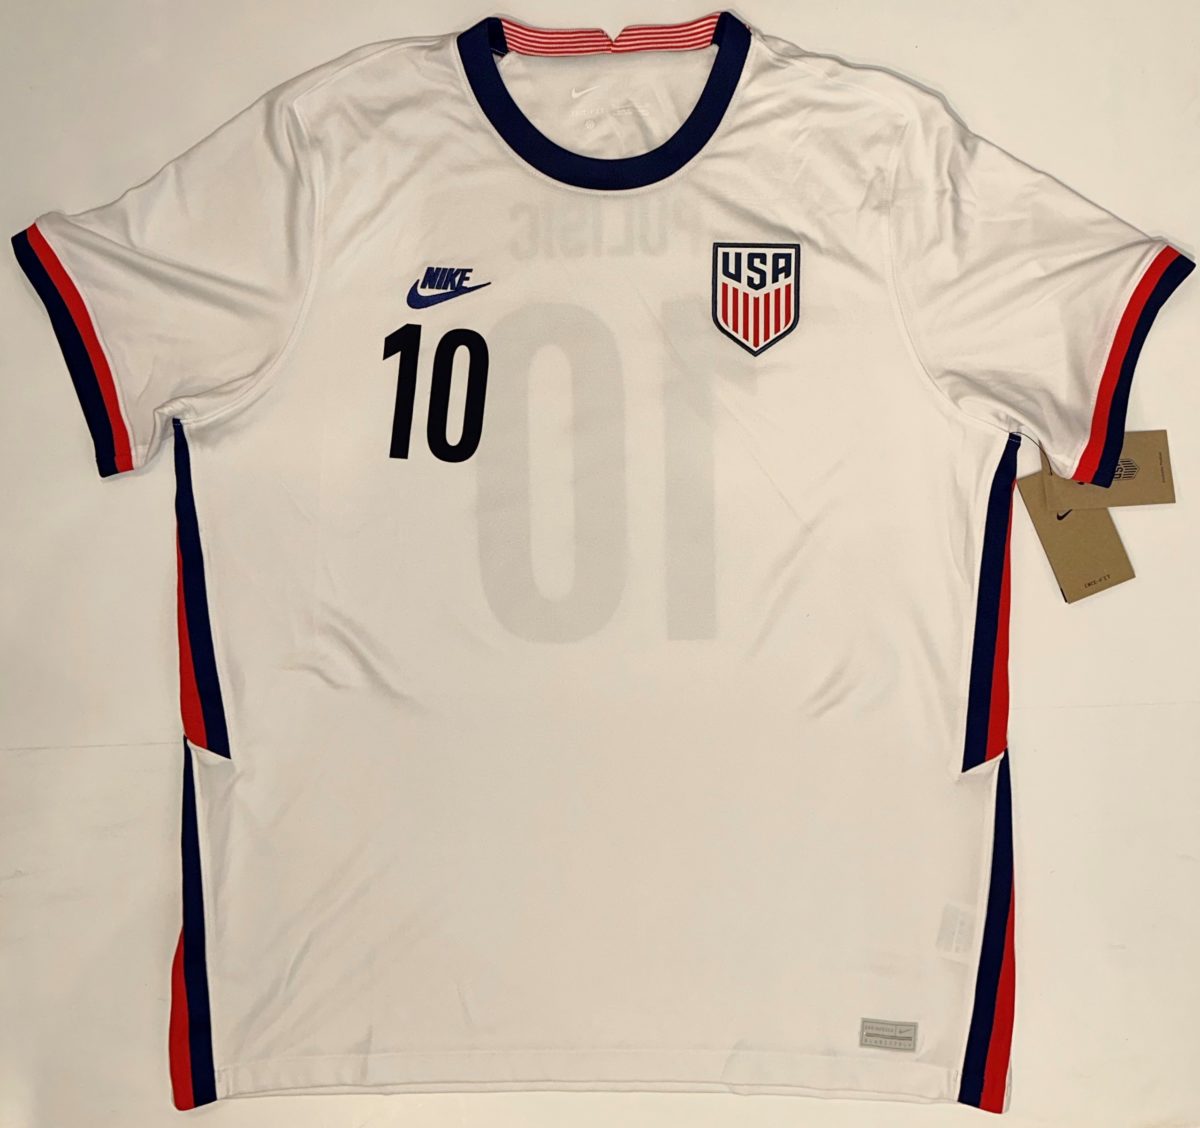 Christian Pulisic Autographed Team USA Soccer Jersey - The Autograph Source